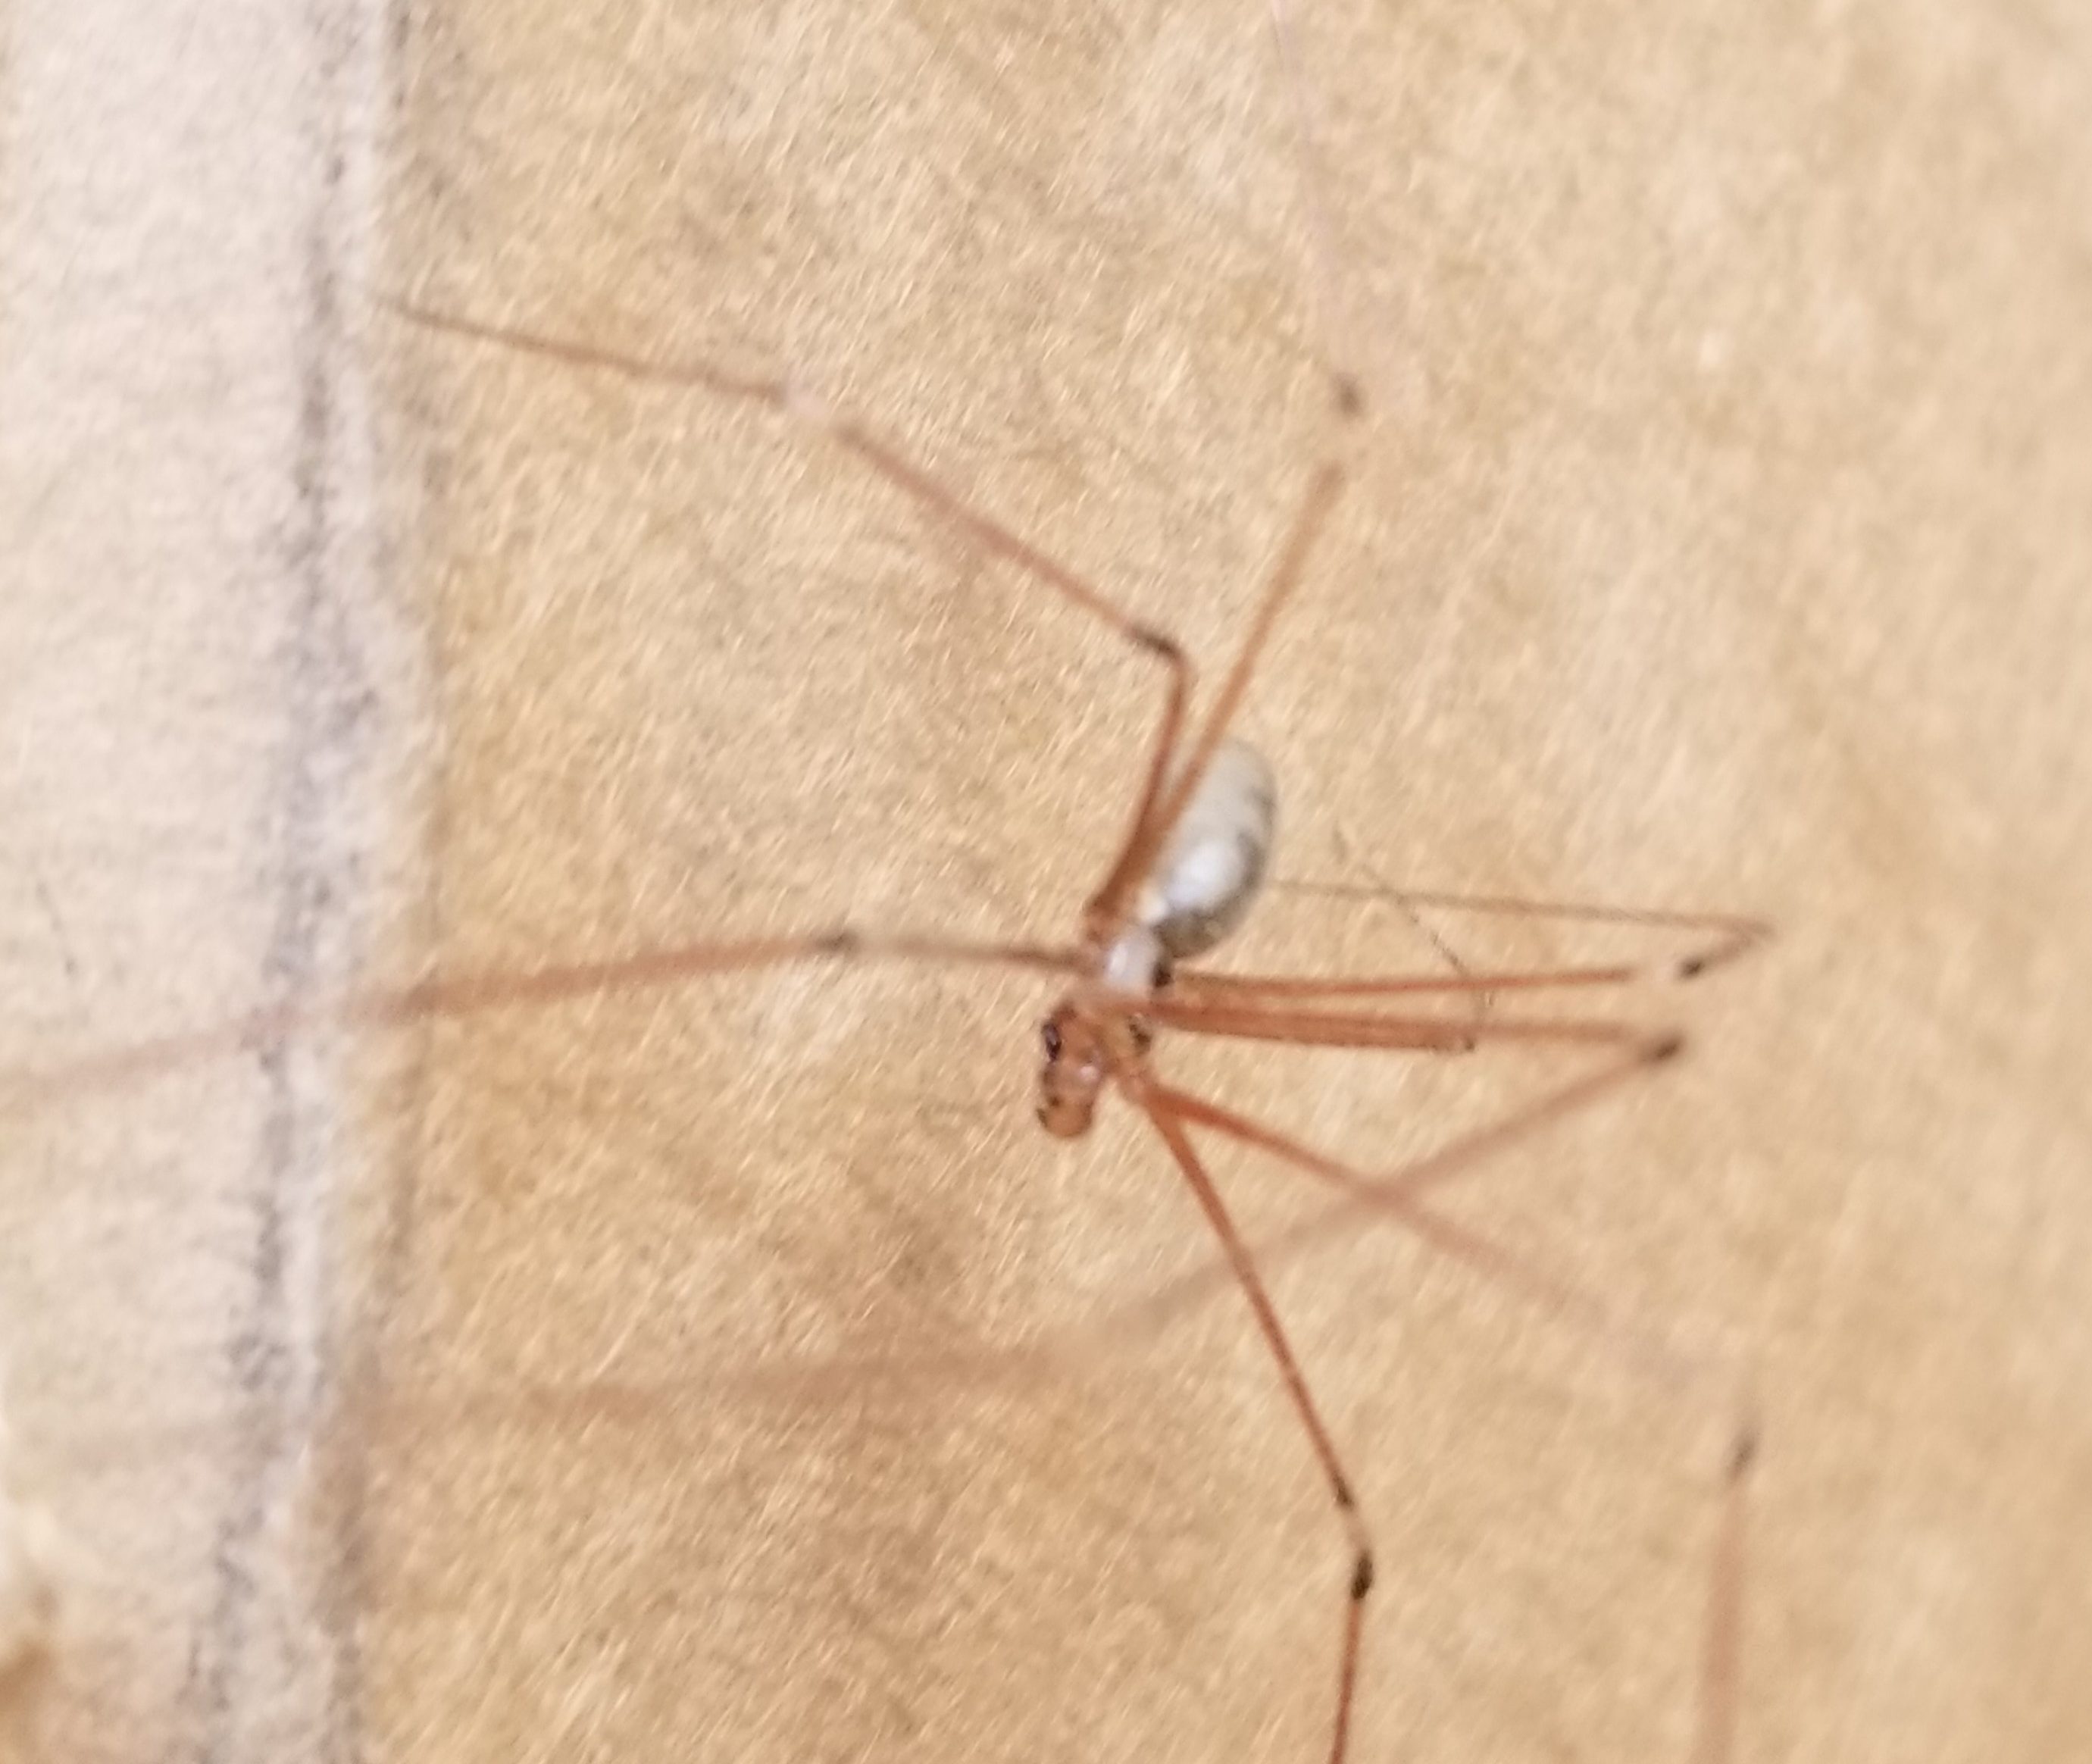 Picture of Pholcus phalangioides (Long-bodied Cellar Spider) - Male - Lateral